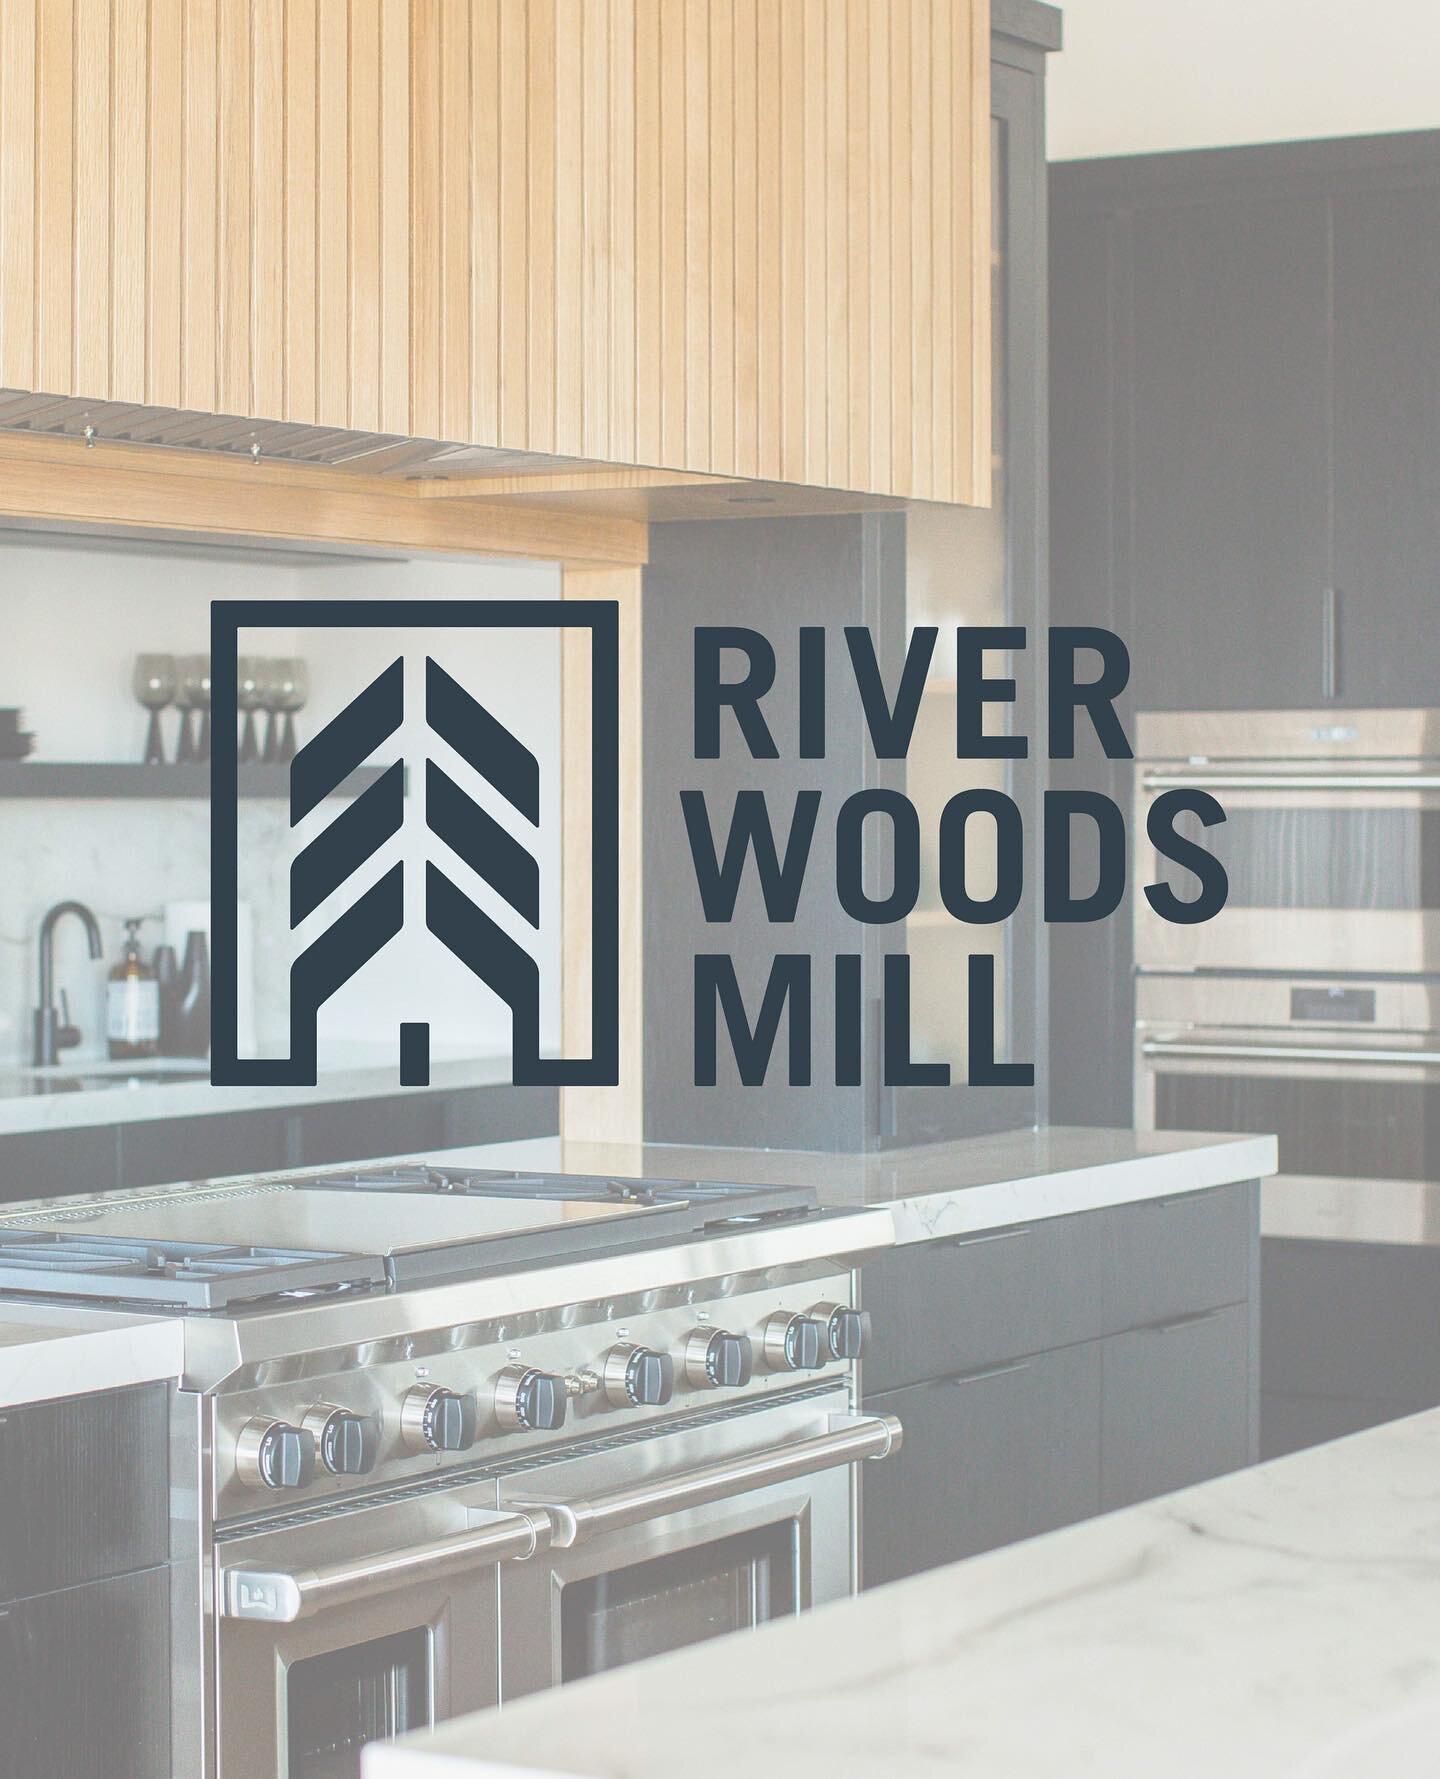 @riverwoodsmill provides quality cabinets, millwork, windows, and appliances. They provide features that speak and take great pride in giving their client&rsquo;s home a soul.